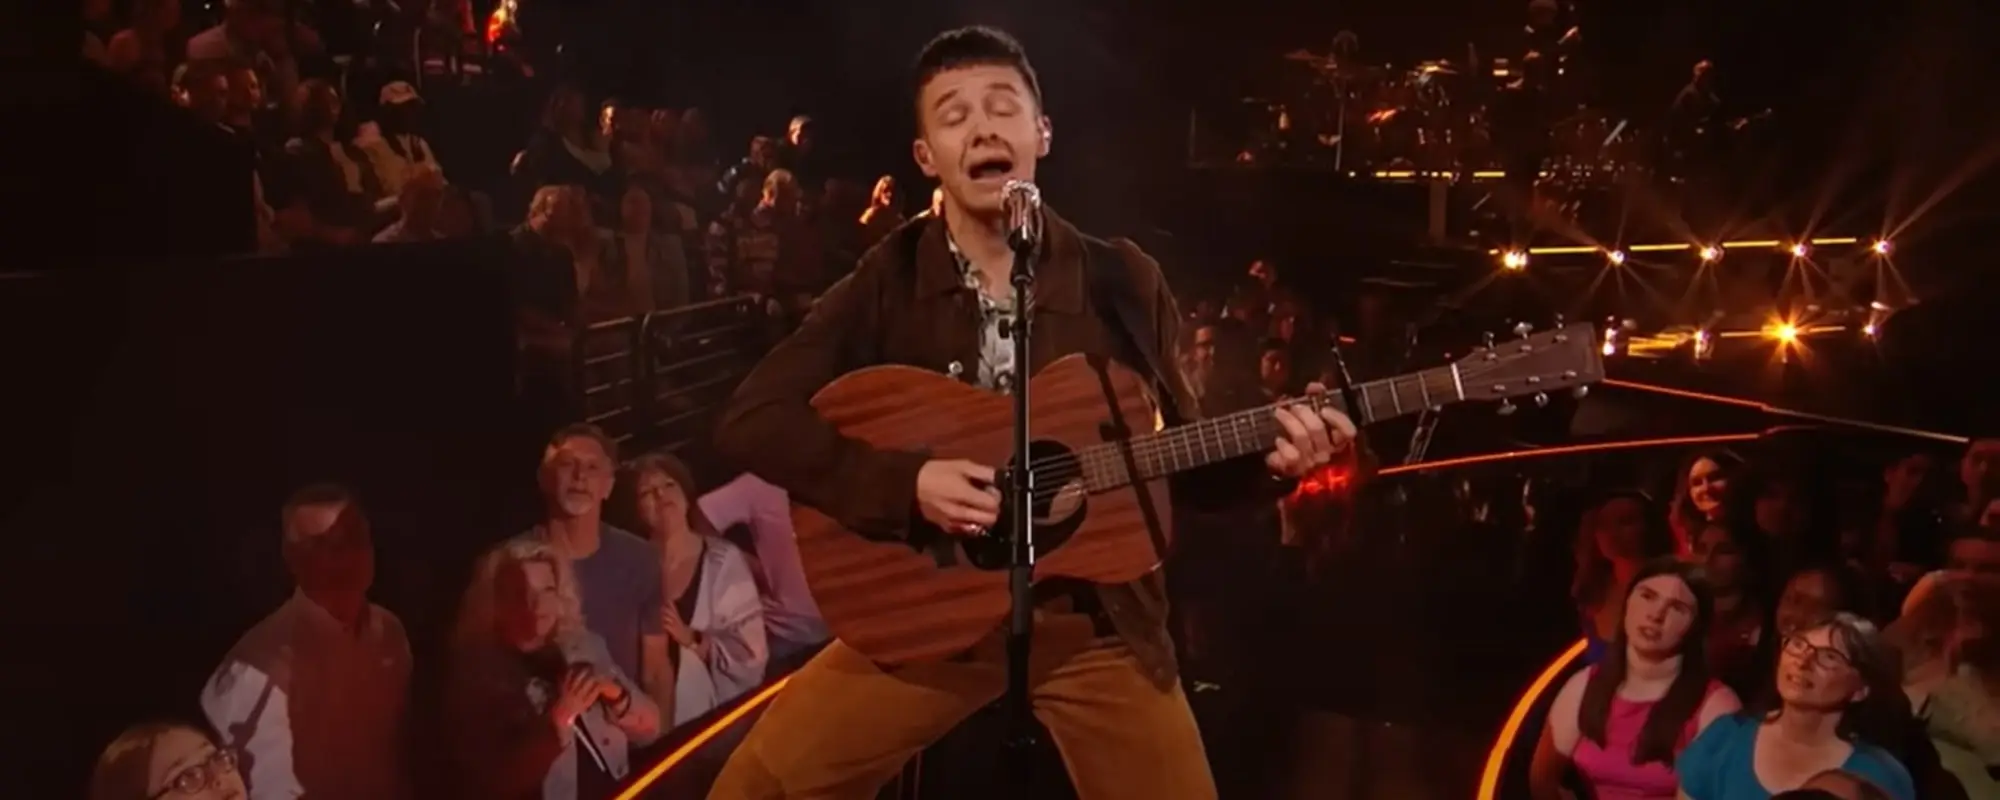 American Idol’s Jack Blocker Proves He’s a Star With Breathtaking Cover of a Bob Dylan Classic